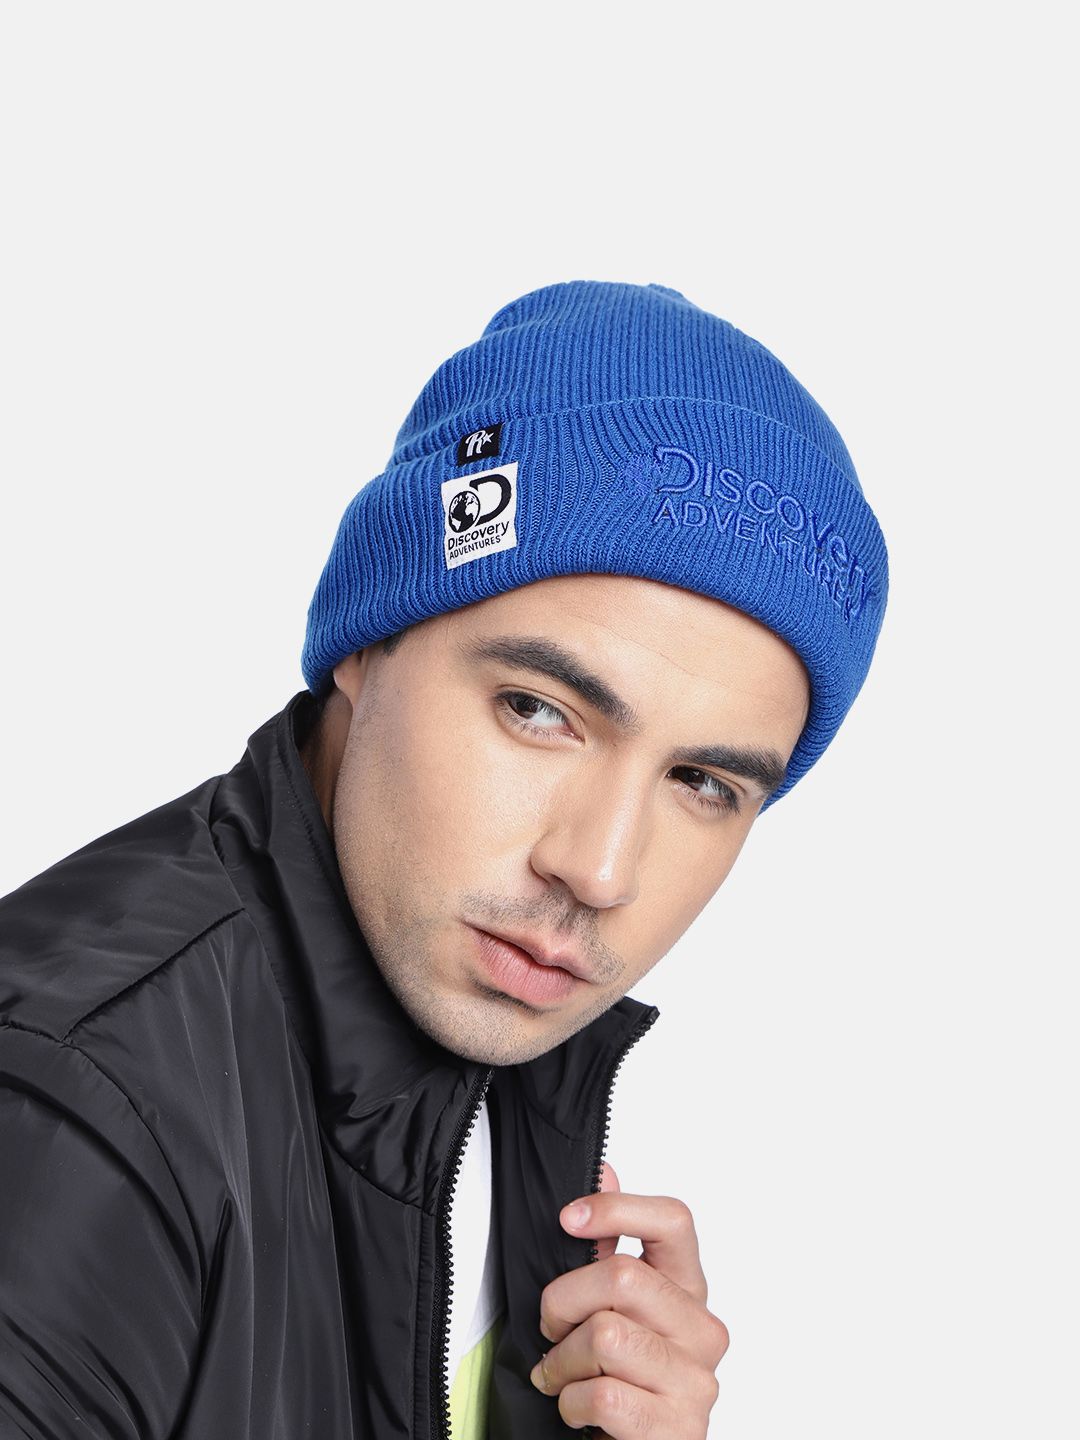 Roadster x Discovery Adventures Unisex Blue Discovery Acrylic Beanie Price in India